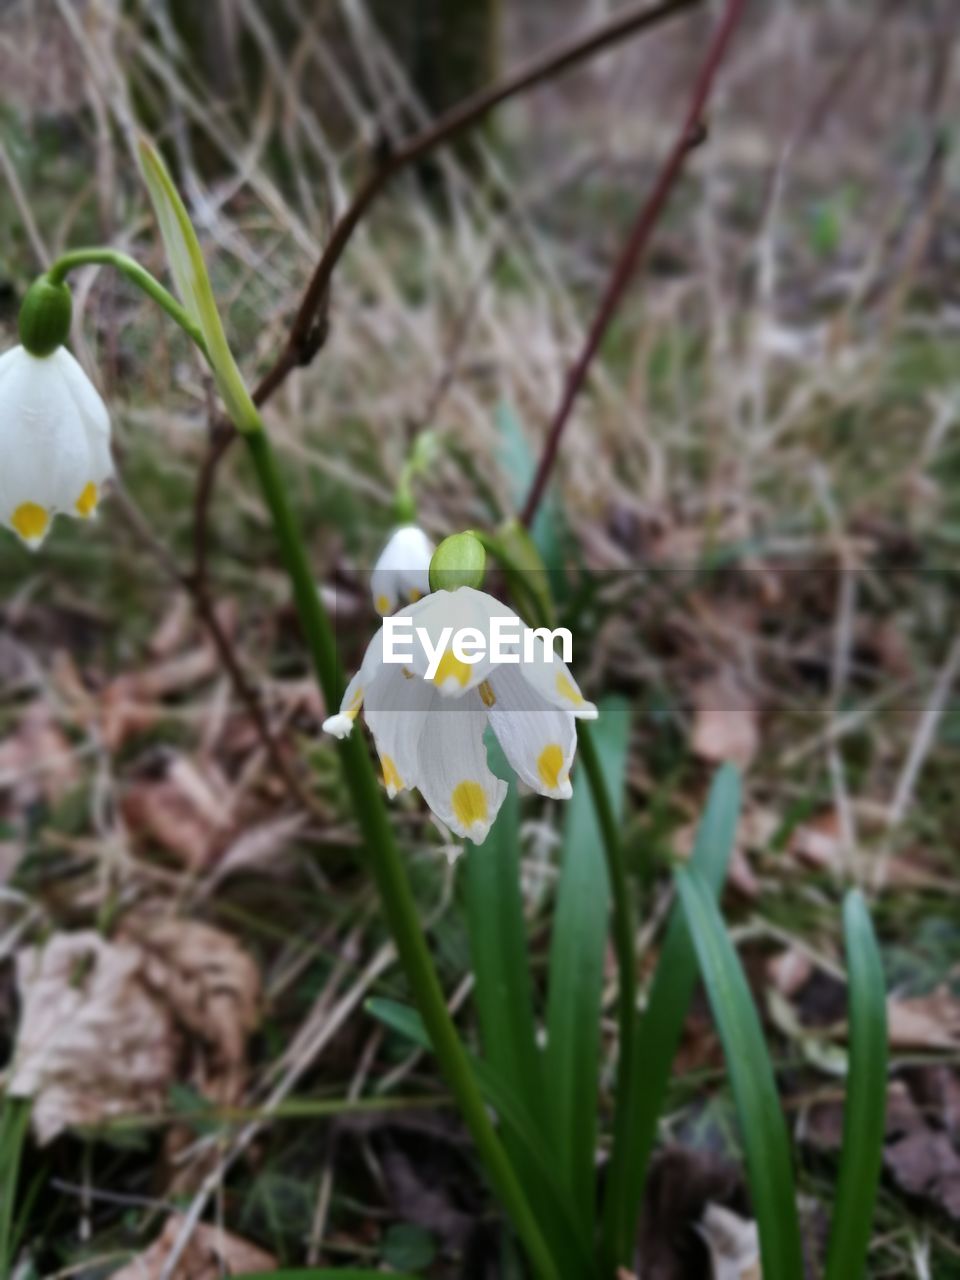 CLOSE-UP OF WHITE CROCUS ON FIELD